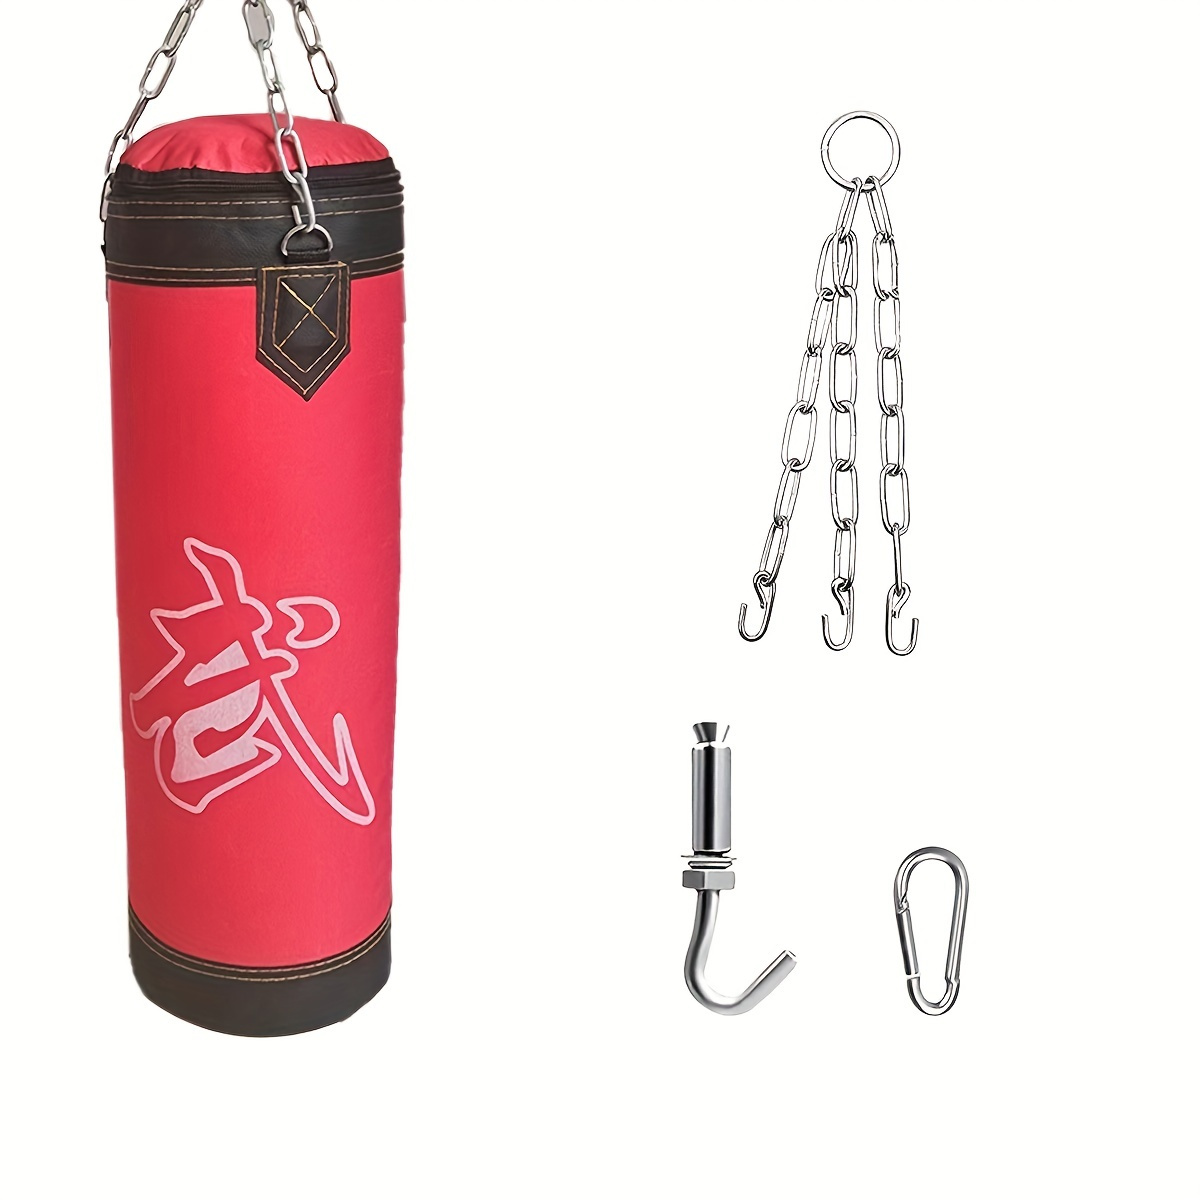 

Boxing Sandbag, Hanging Boxing Sandbag, With Hooks And Stainless Steel Chains, For Martial Arts, Combat Training, 60cm/23.62in, 1 Set